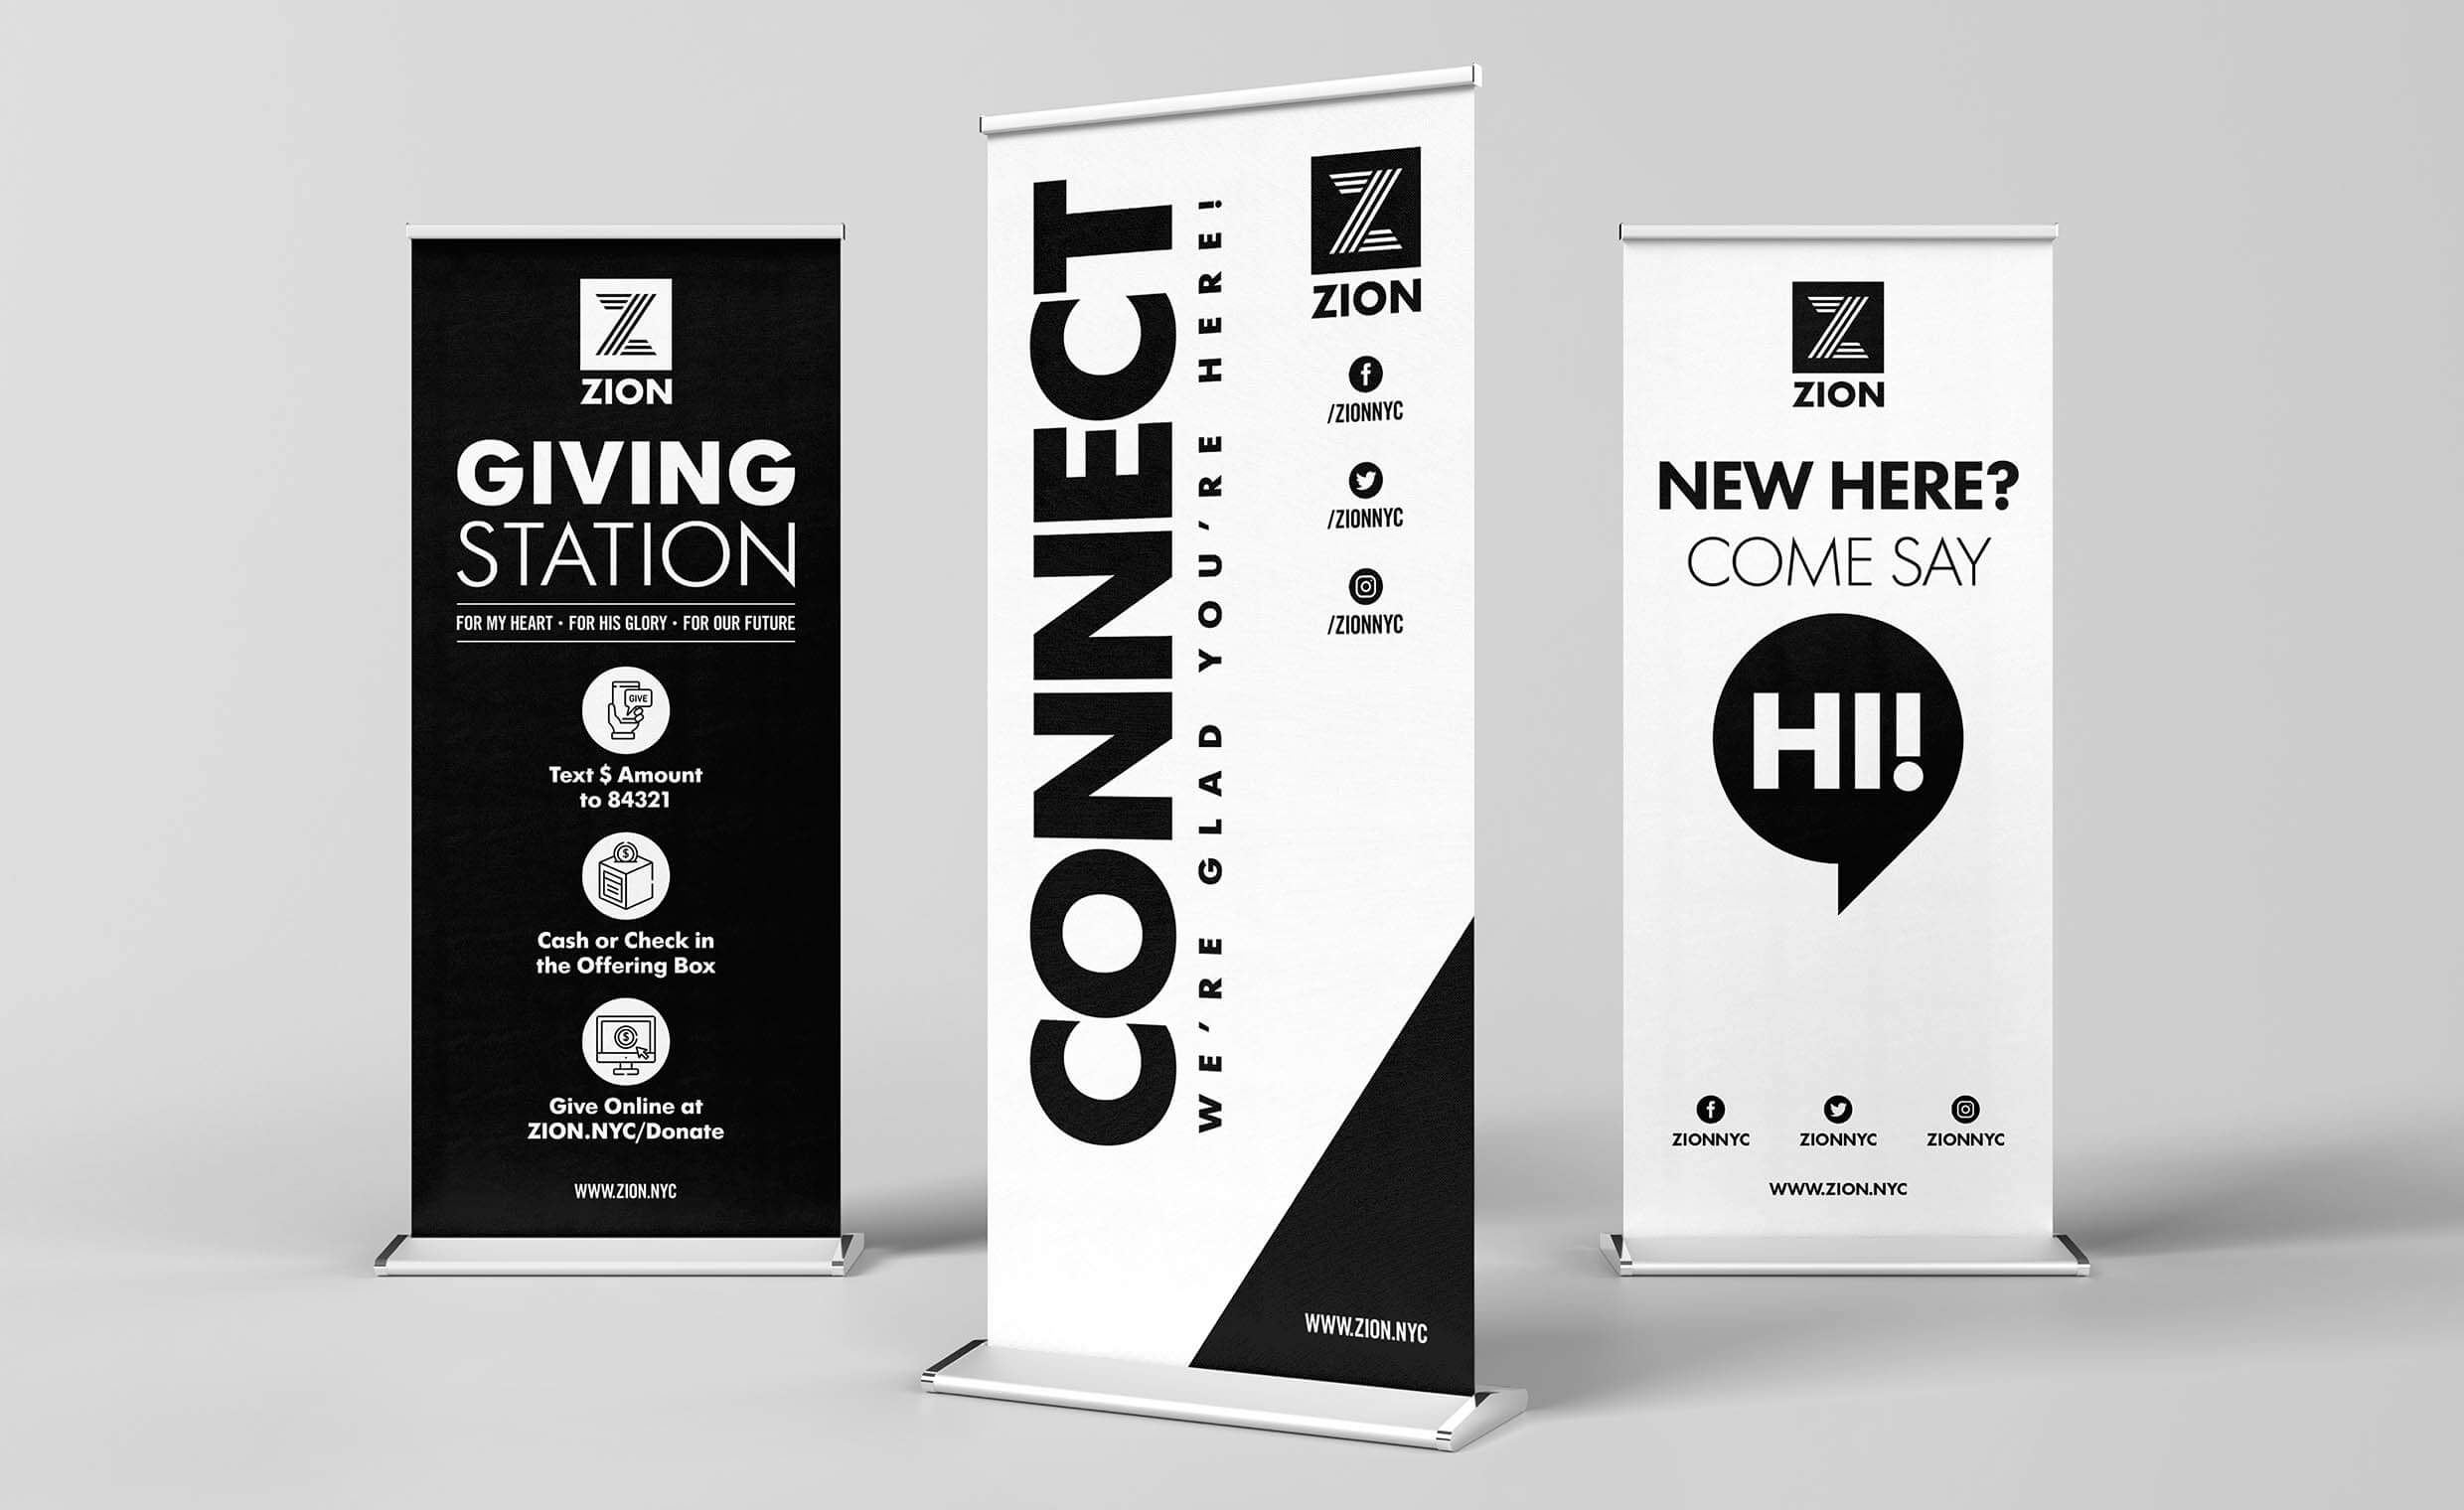 ZION NYC Retractable Banners